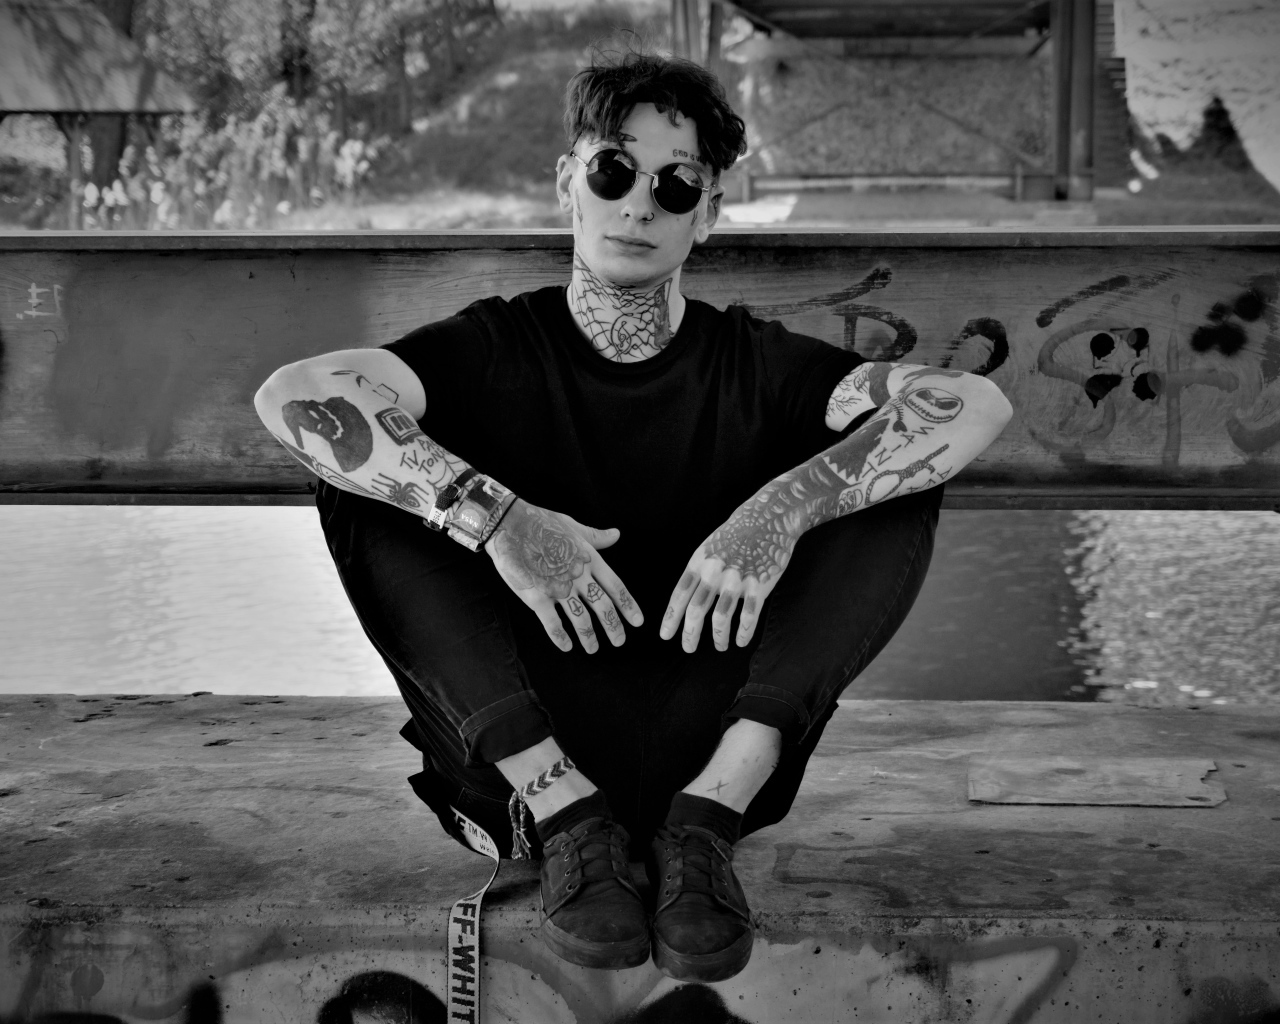 A man in black glasses with tattoos on his body.